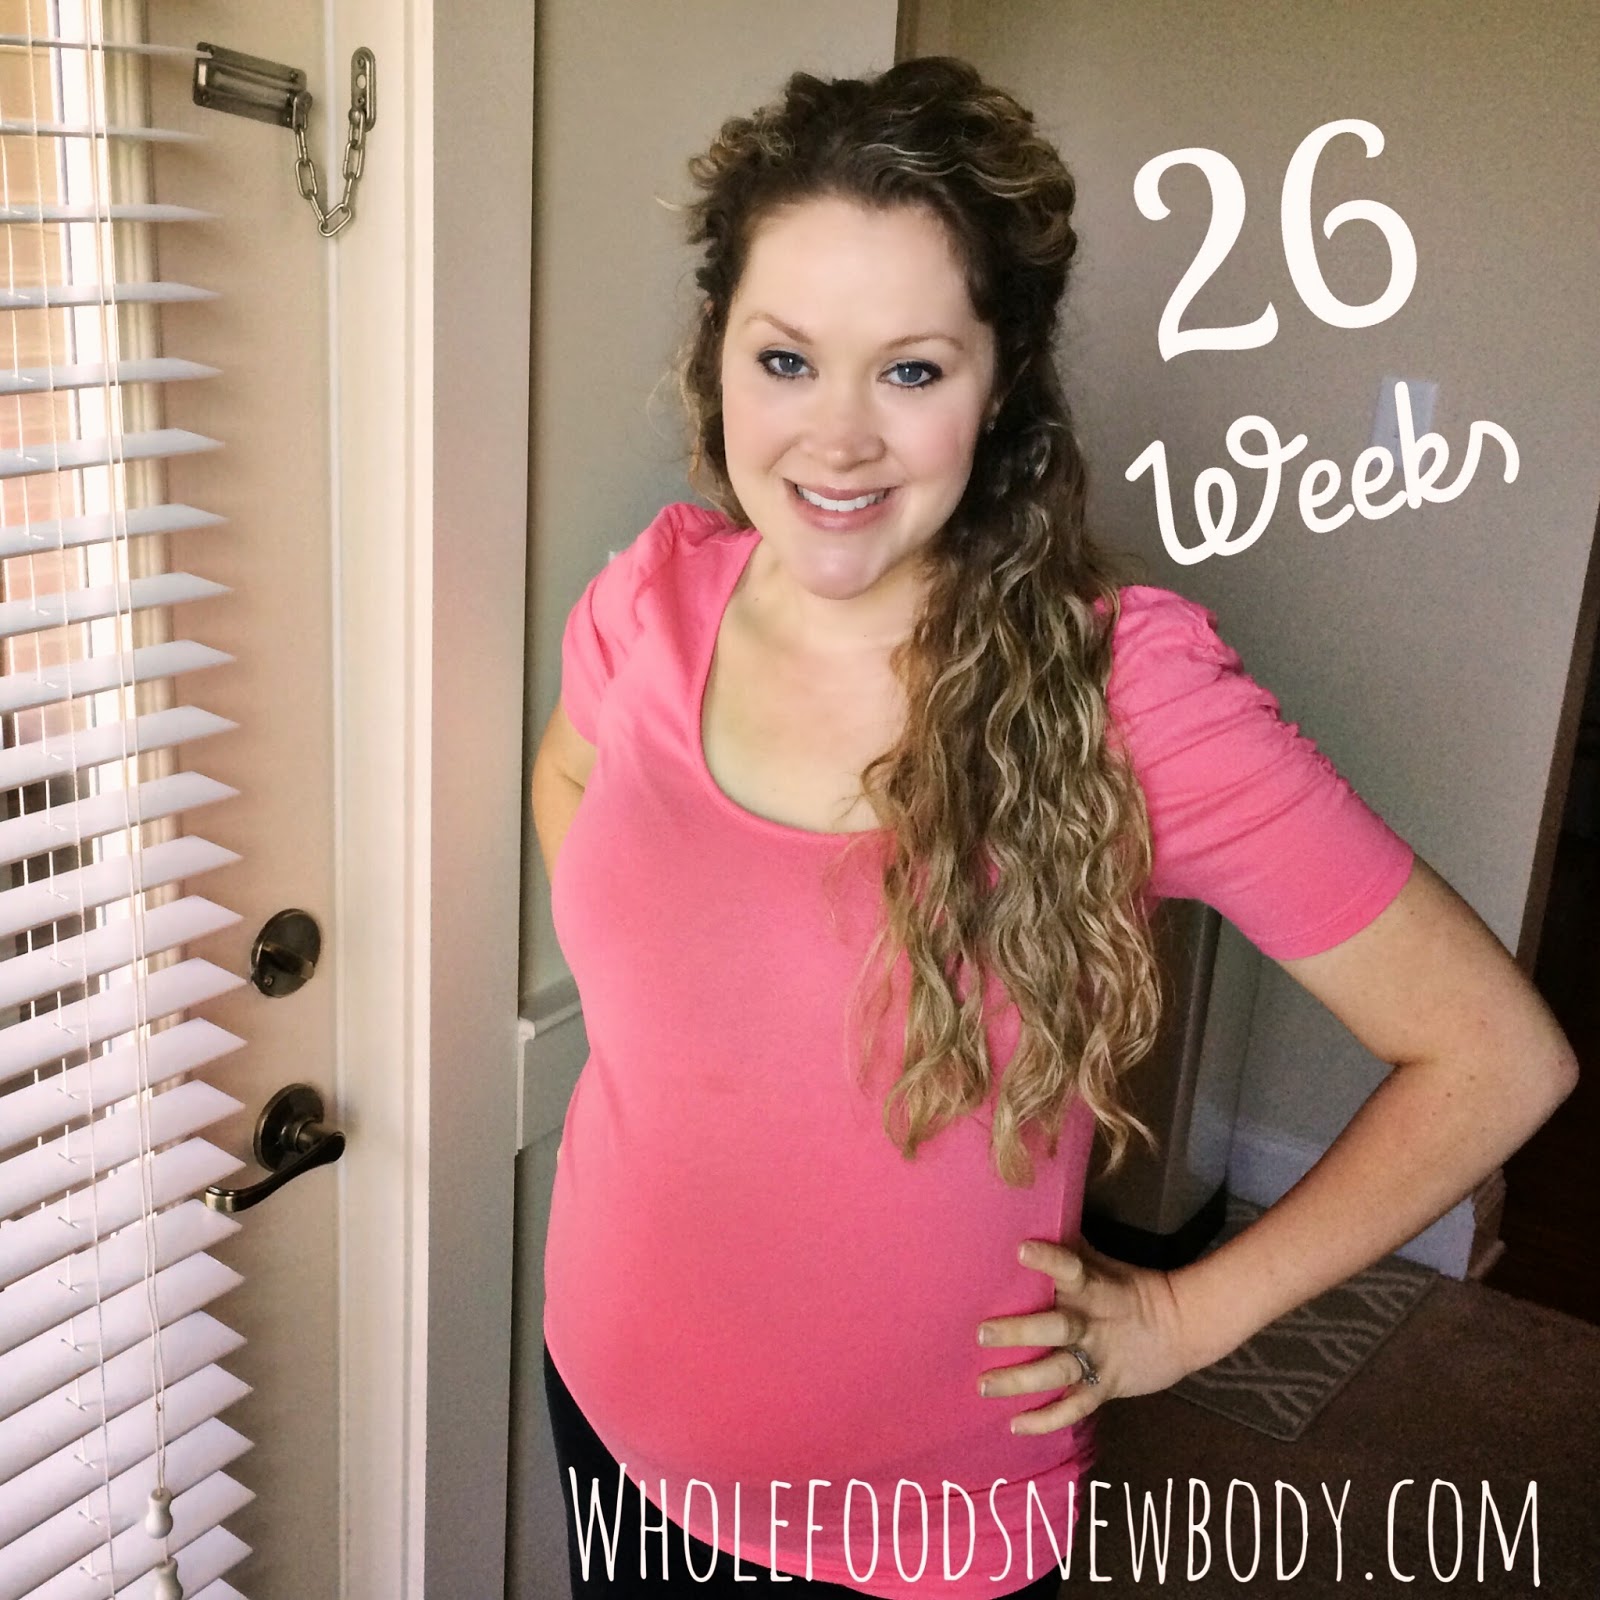 Whole Foods New Body: {26 week BUMPdate}